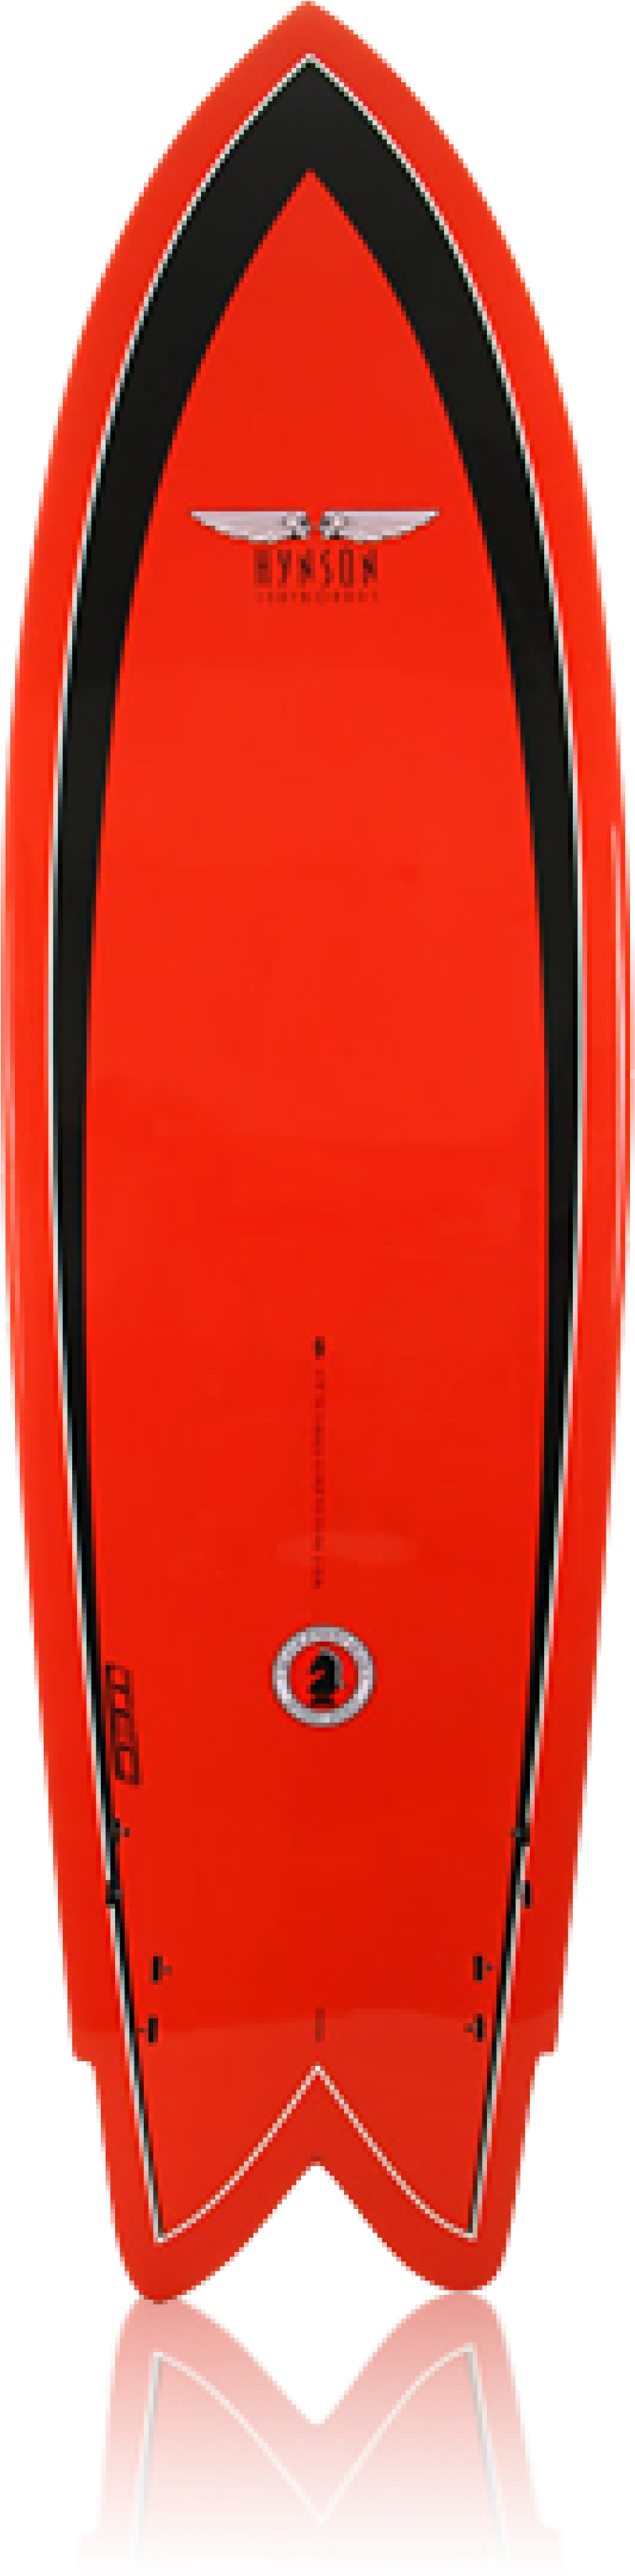 Red Surfboard Standing Vertical PNG image